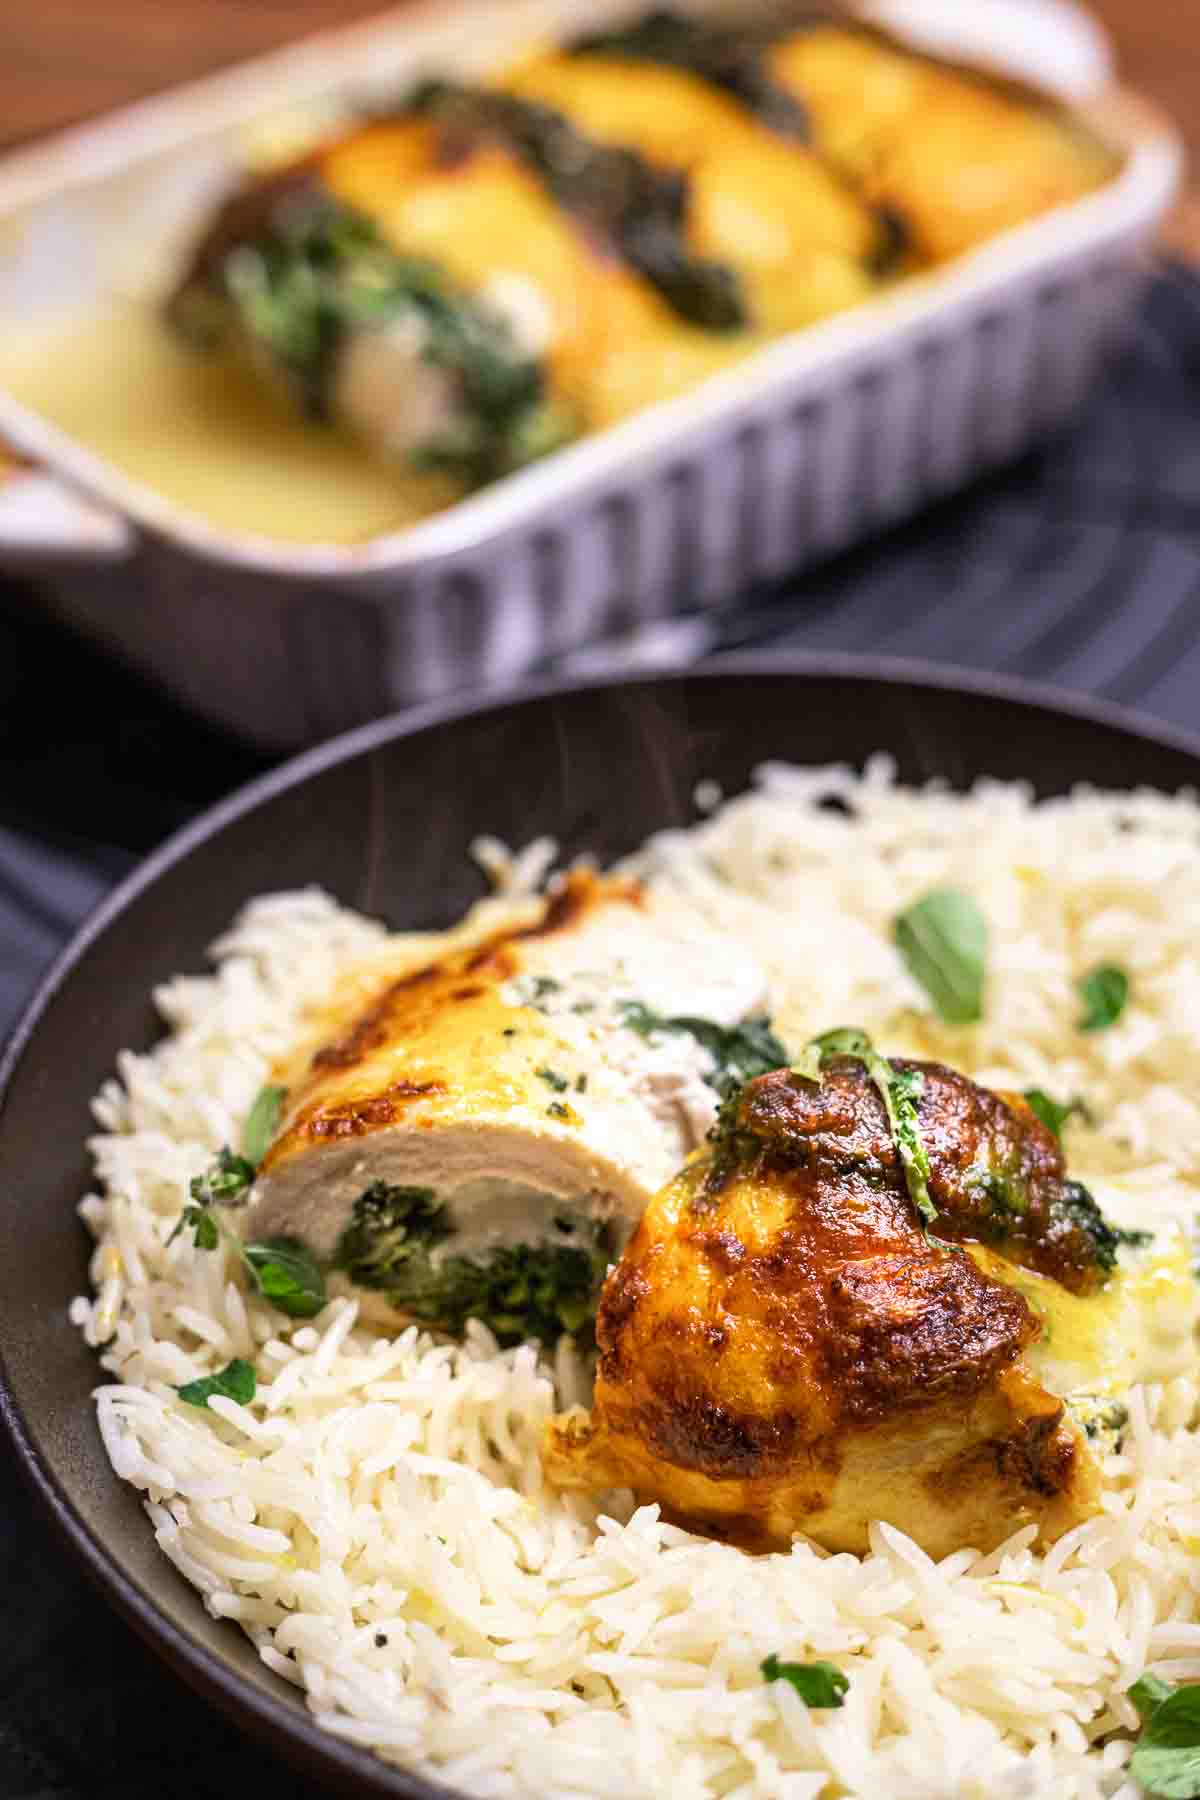 Chicken stuffed with spinach and rice.